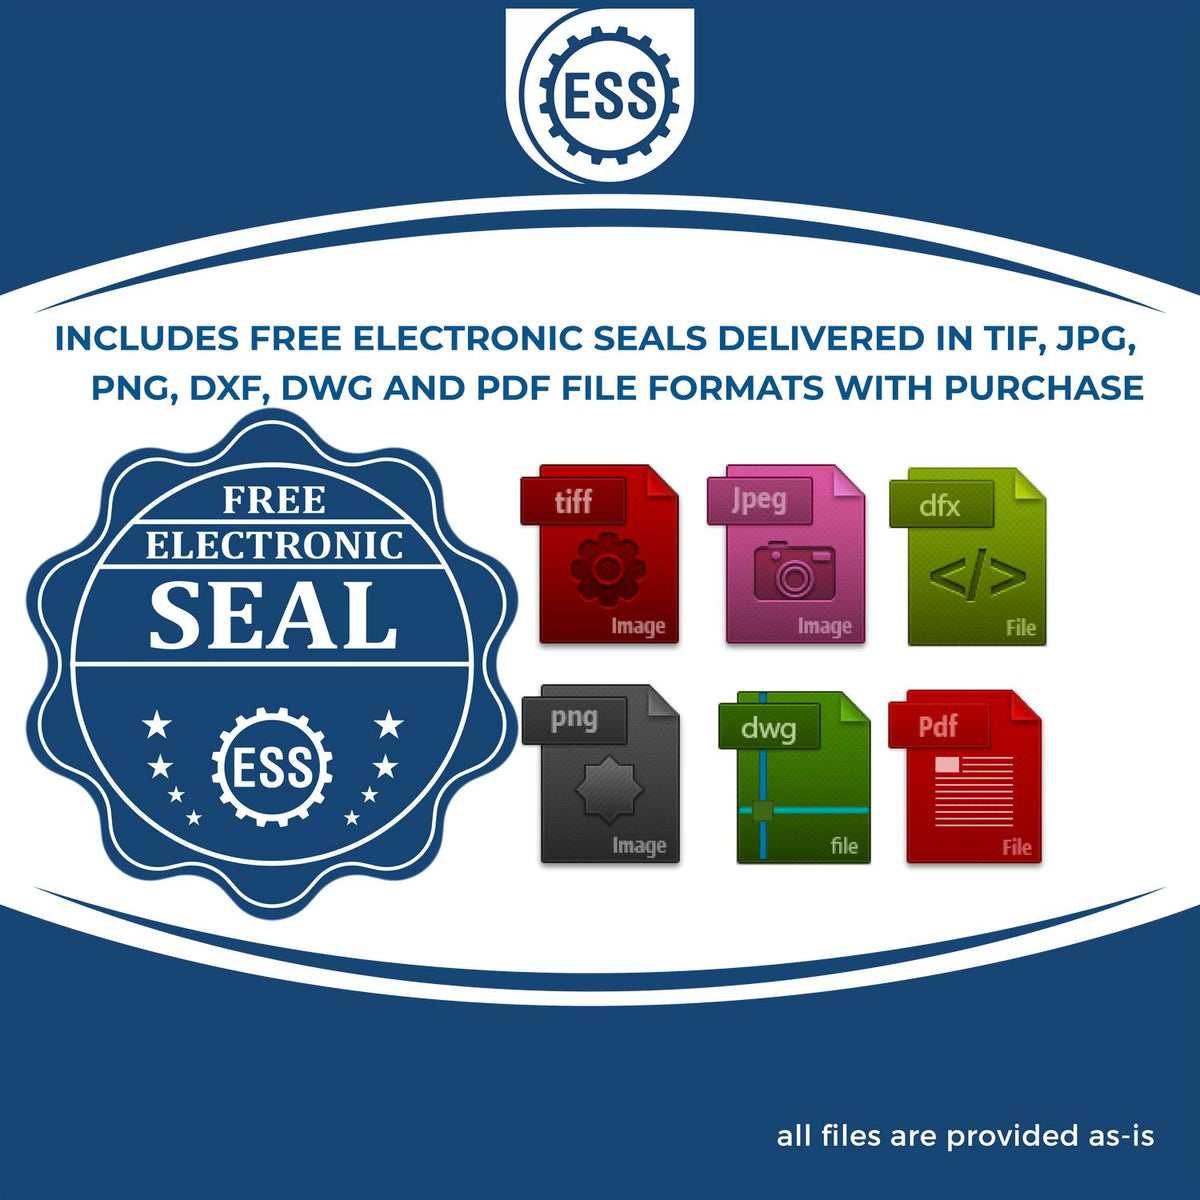 An infographic for the free electronic seal for the Self-Inking Arkansas Geologist Stamp illustrating the different file type icons such as DXF, DWG, TIF, JPG and PNG.